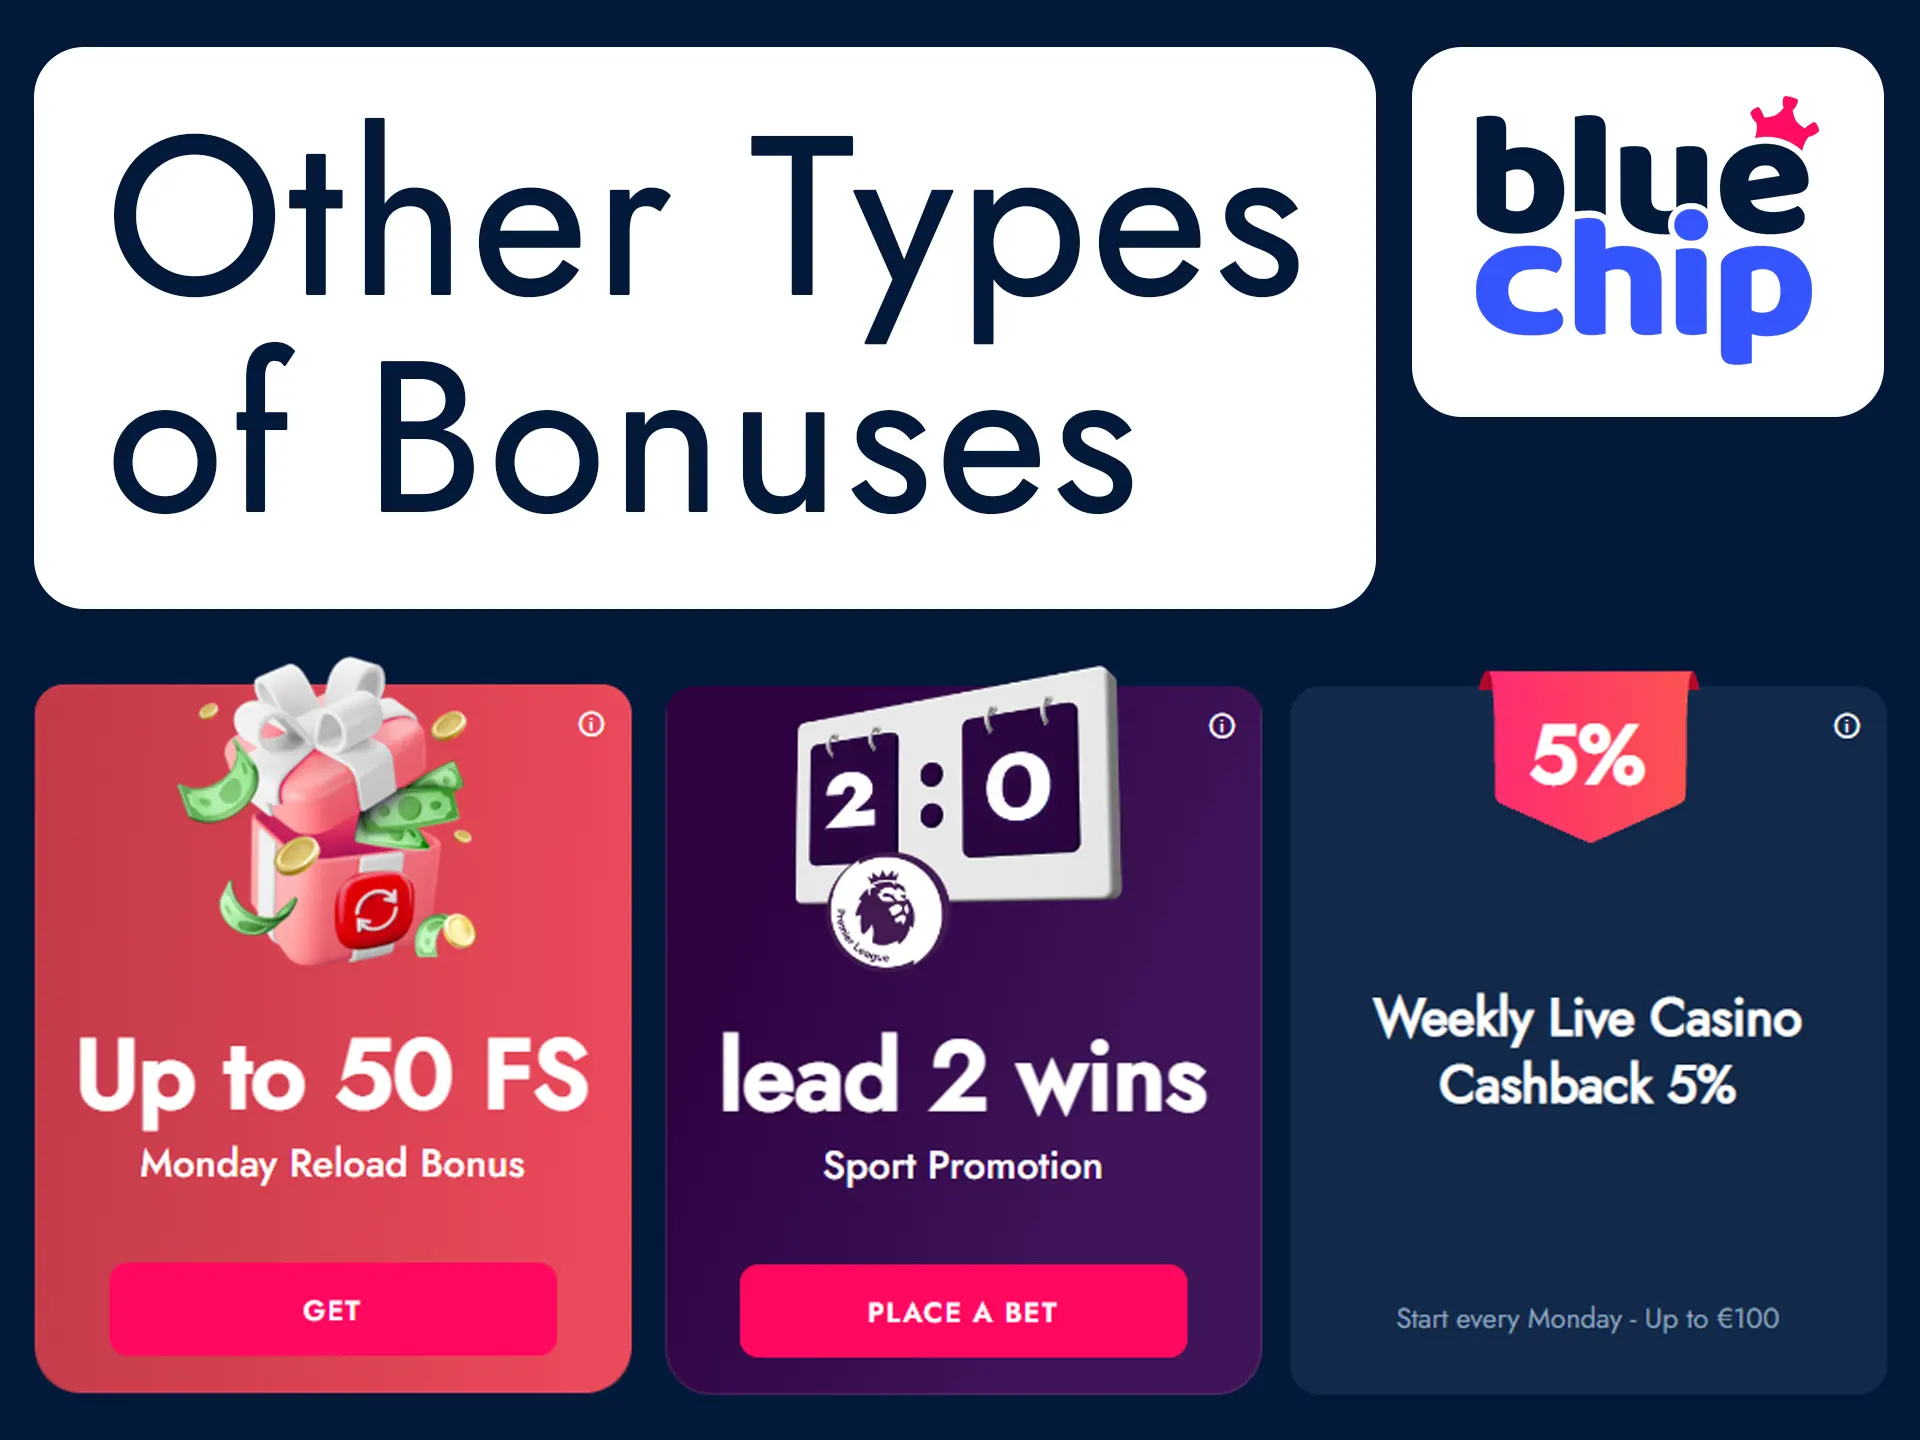 Get different types of bonuses at Bluechip.